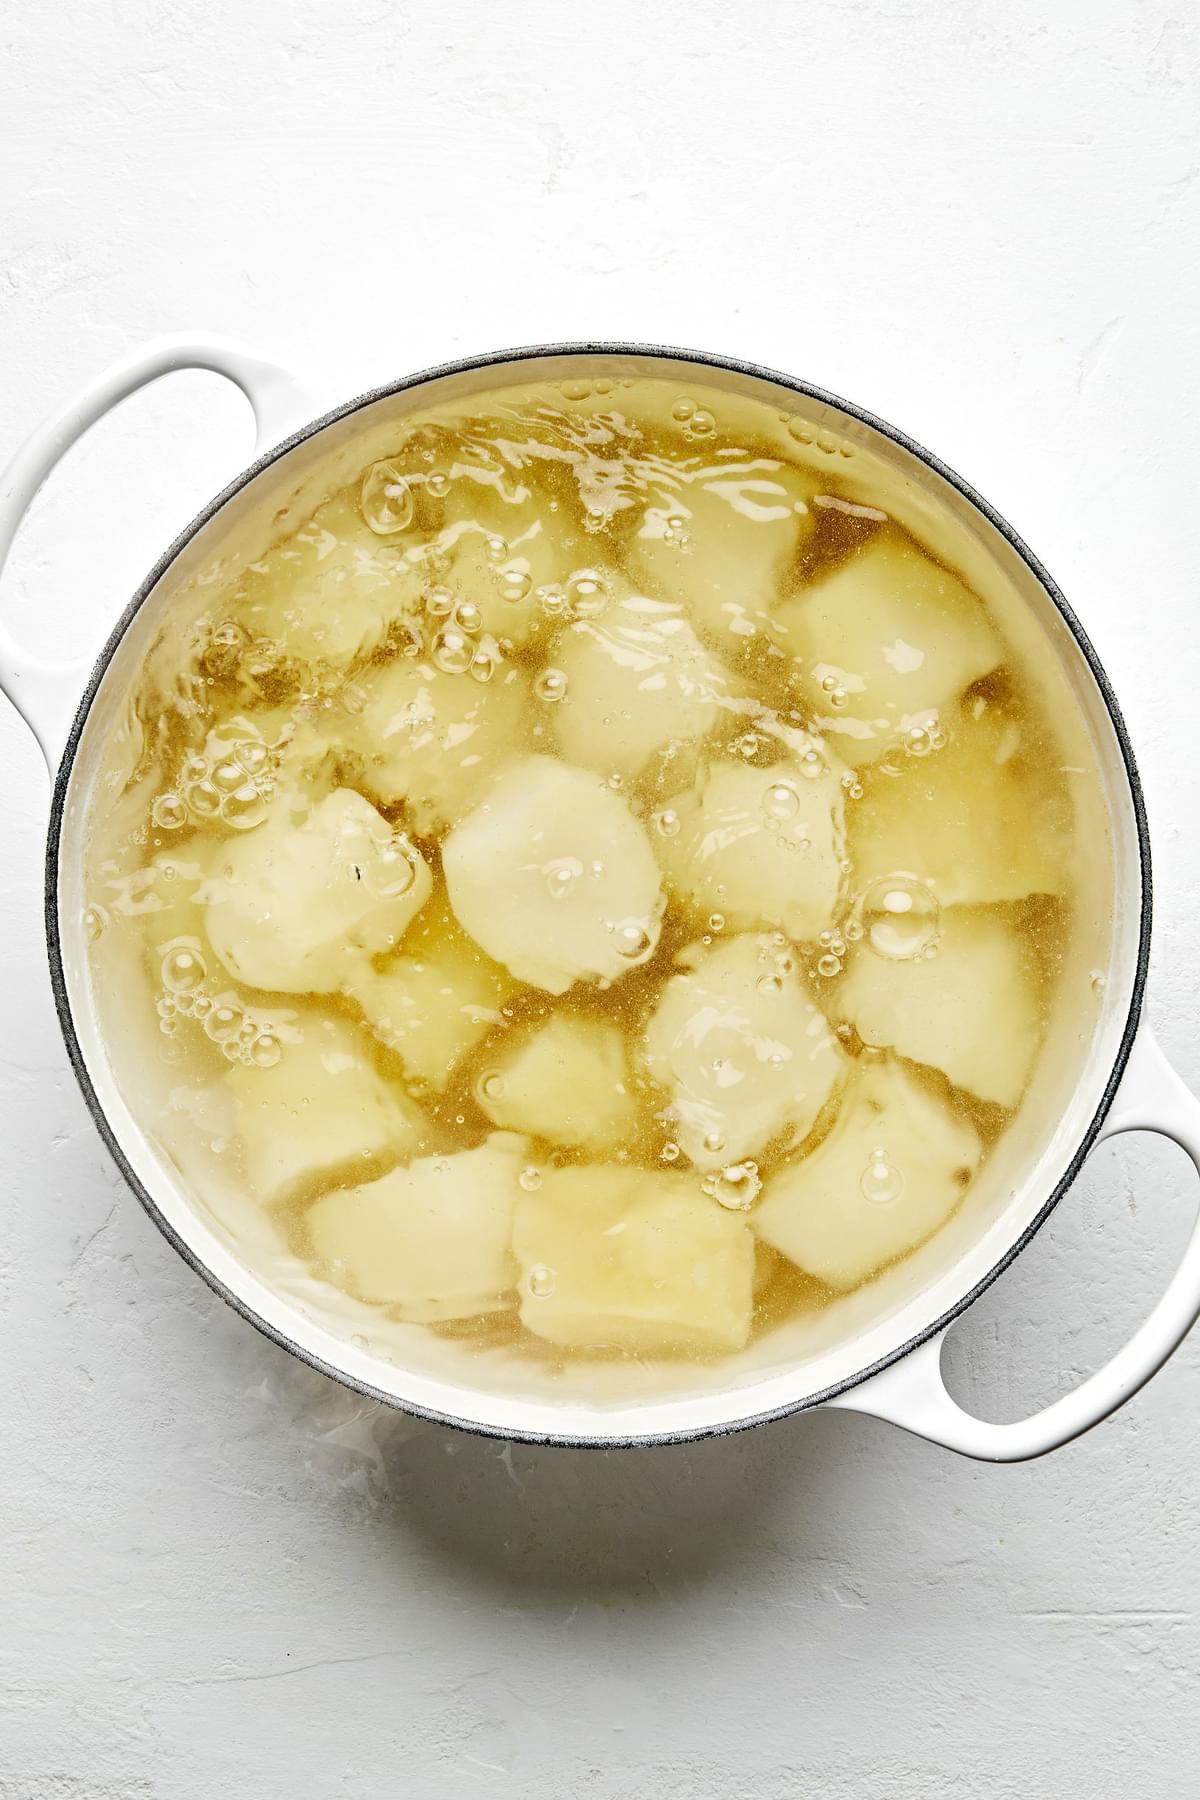 russet potatoes being boiled in a pot of water to make classic mashed potatoes